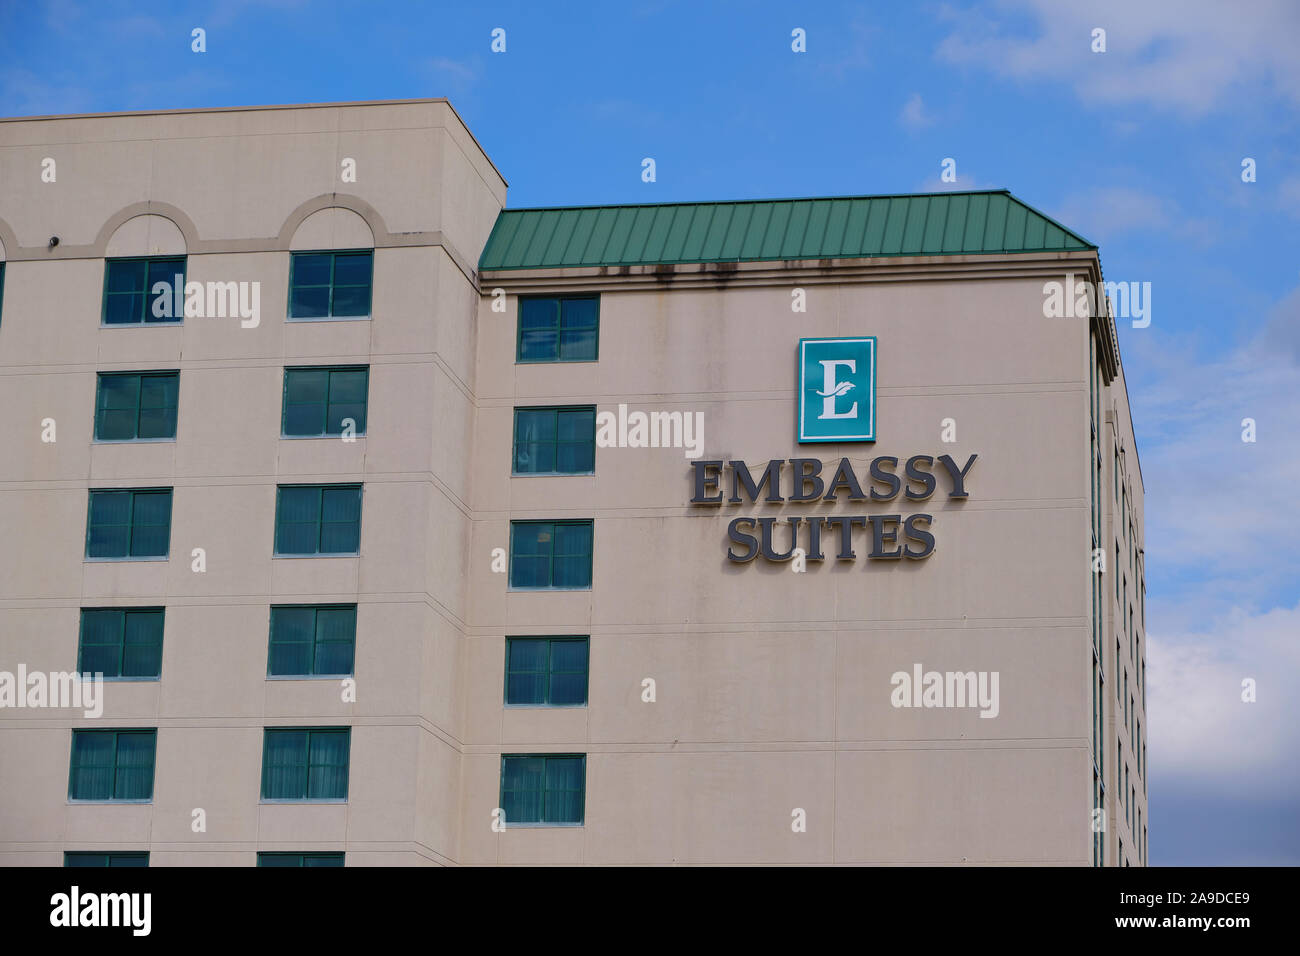 Exterior Embassy Suites hotel sign in Montgomery Alabama, USA. Stock Photo